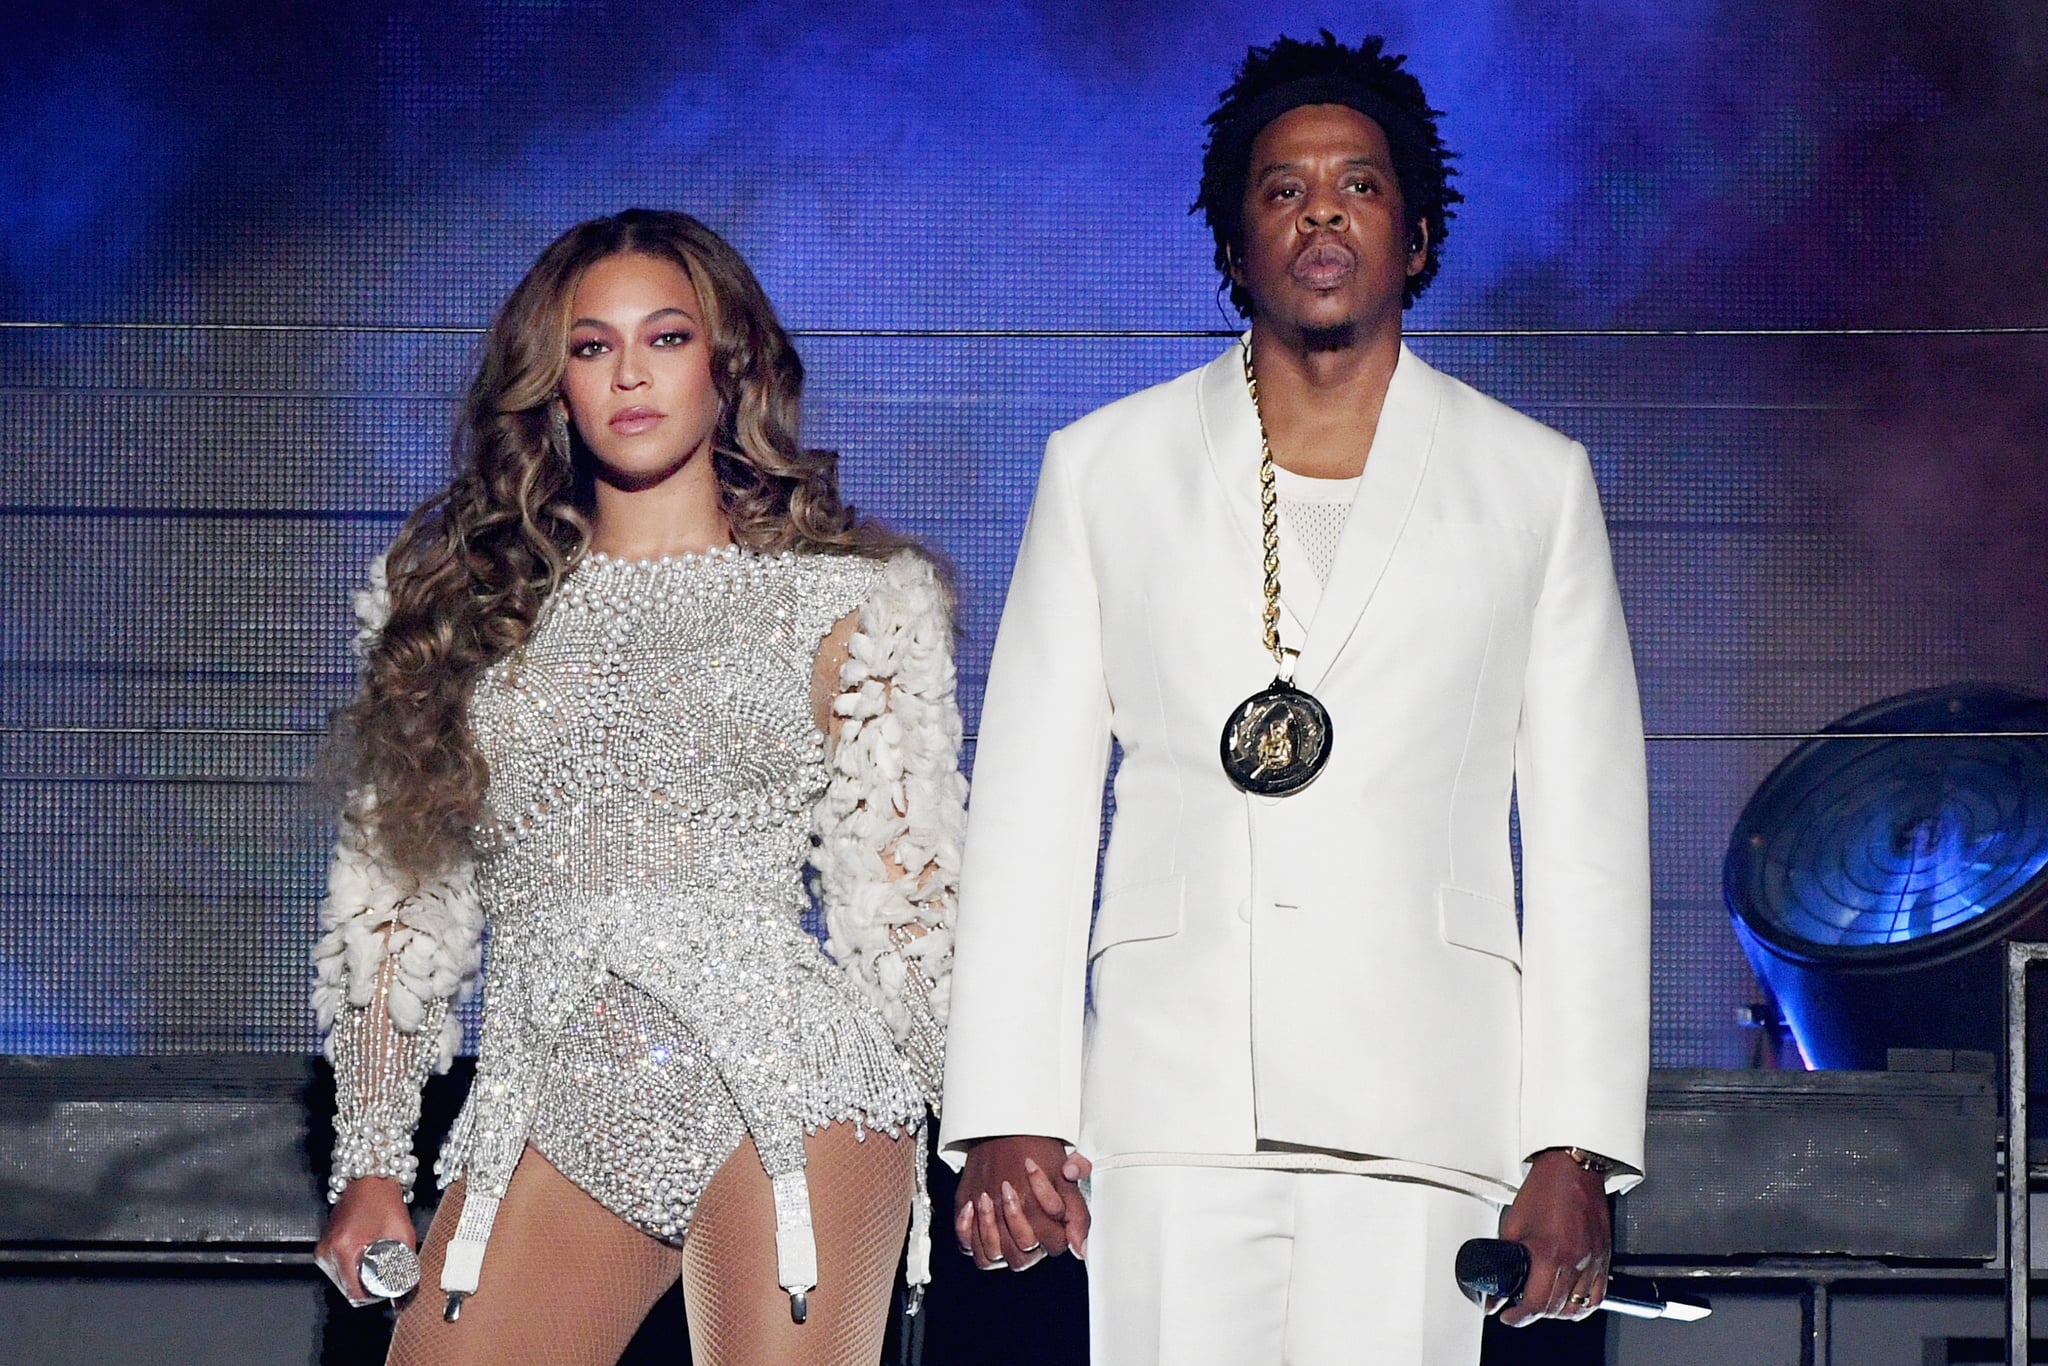 PASADENA, CA - SEPTEMBER 22:  Beyonce (L) and JAY-Z perform onstage during the 'On The Run II' Tour at Rose Bowl on September 22, 2018 in Pasadena, California.  (Photo by Larry Busacca/PW18/Getty Images for Parkwood Entertainment)